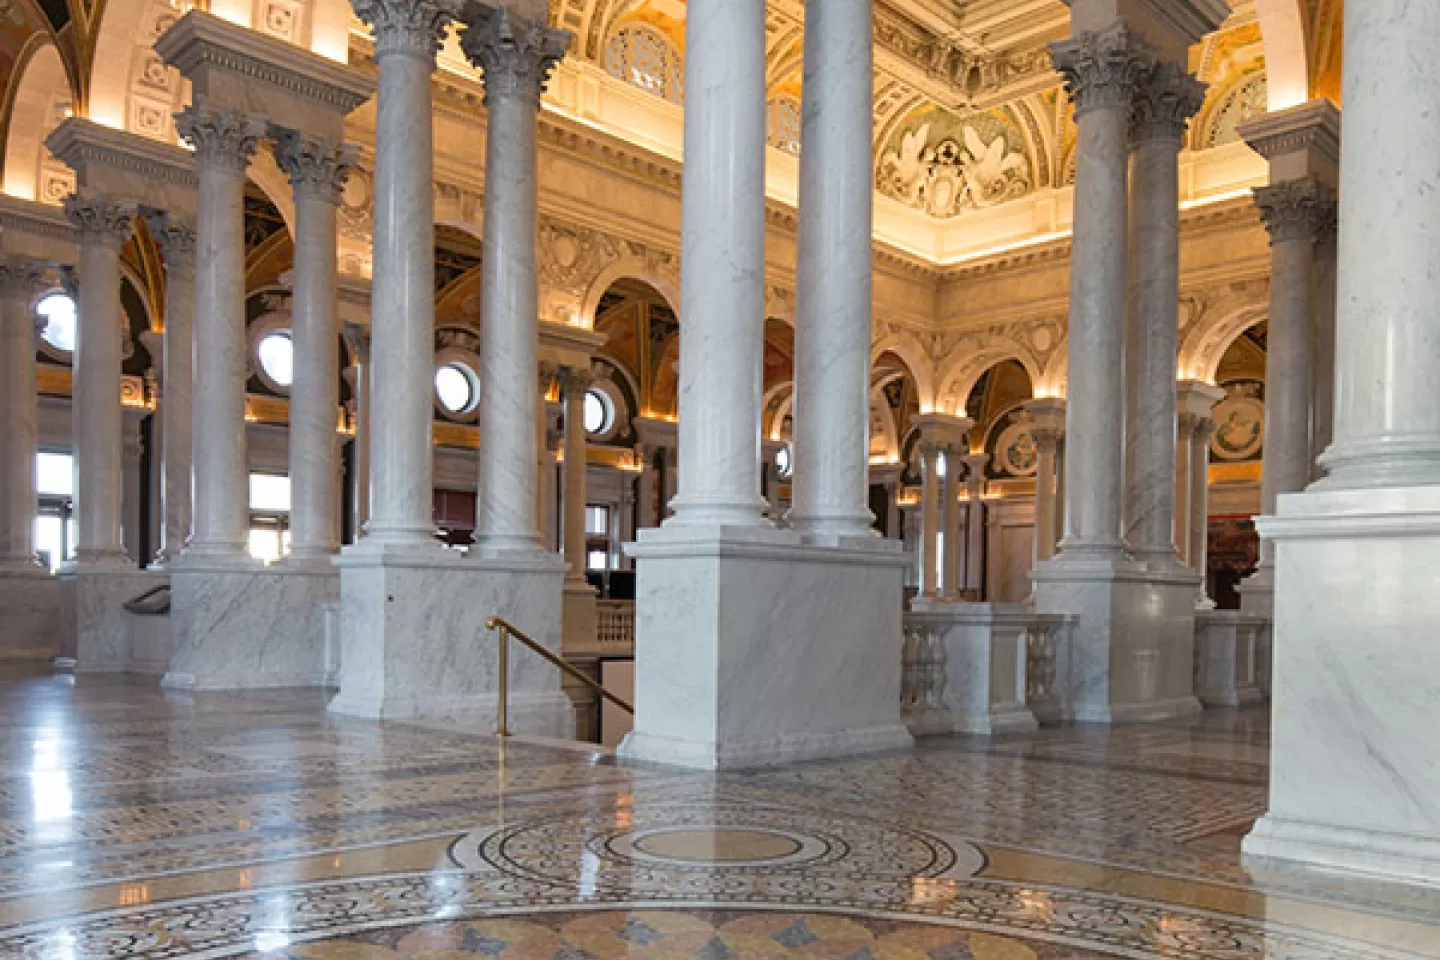 From the mosaic tiled floor to the Corinthian columns and painted archways, the Great Hall in the Library of Congress Thomas Jefferson Building has history and beauty worth stopping to admire.